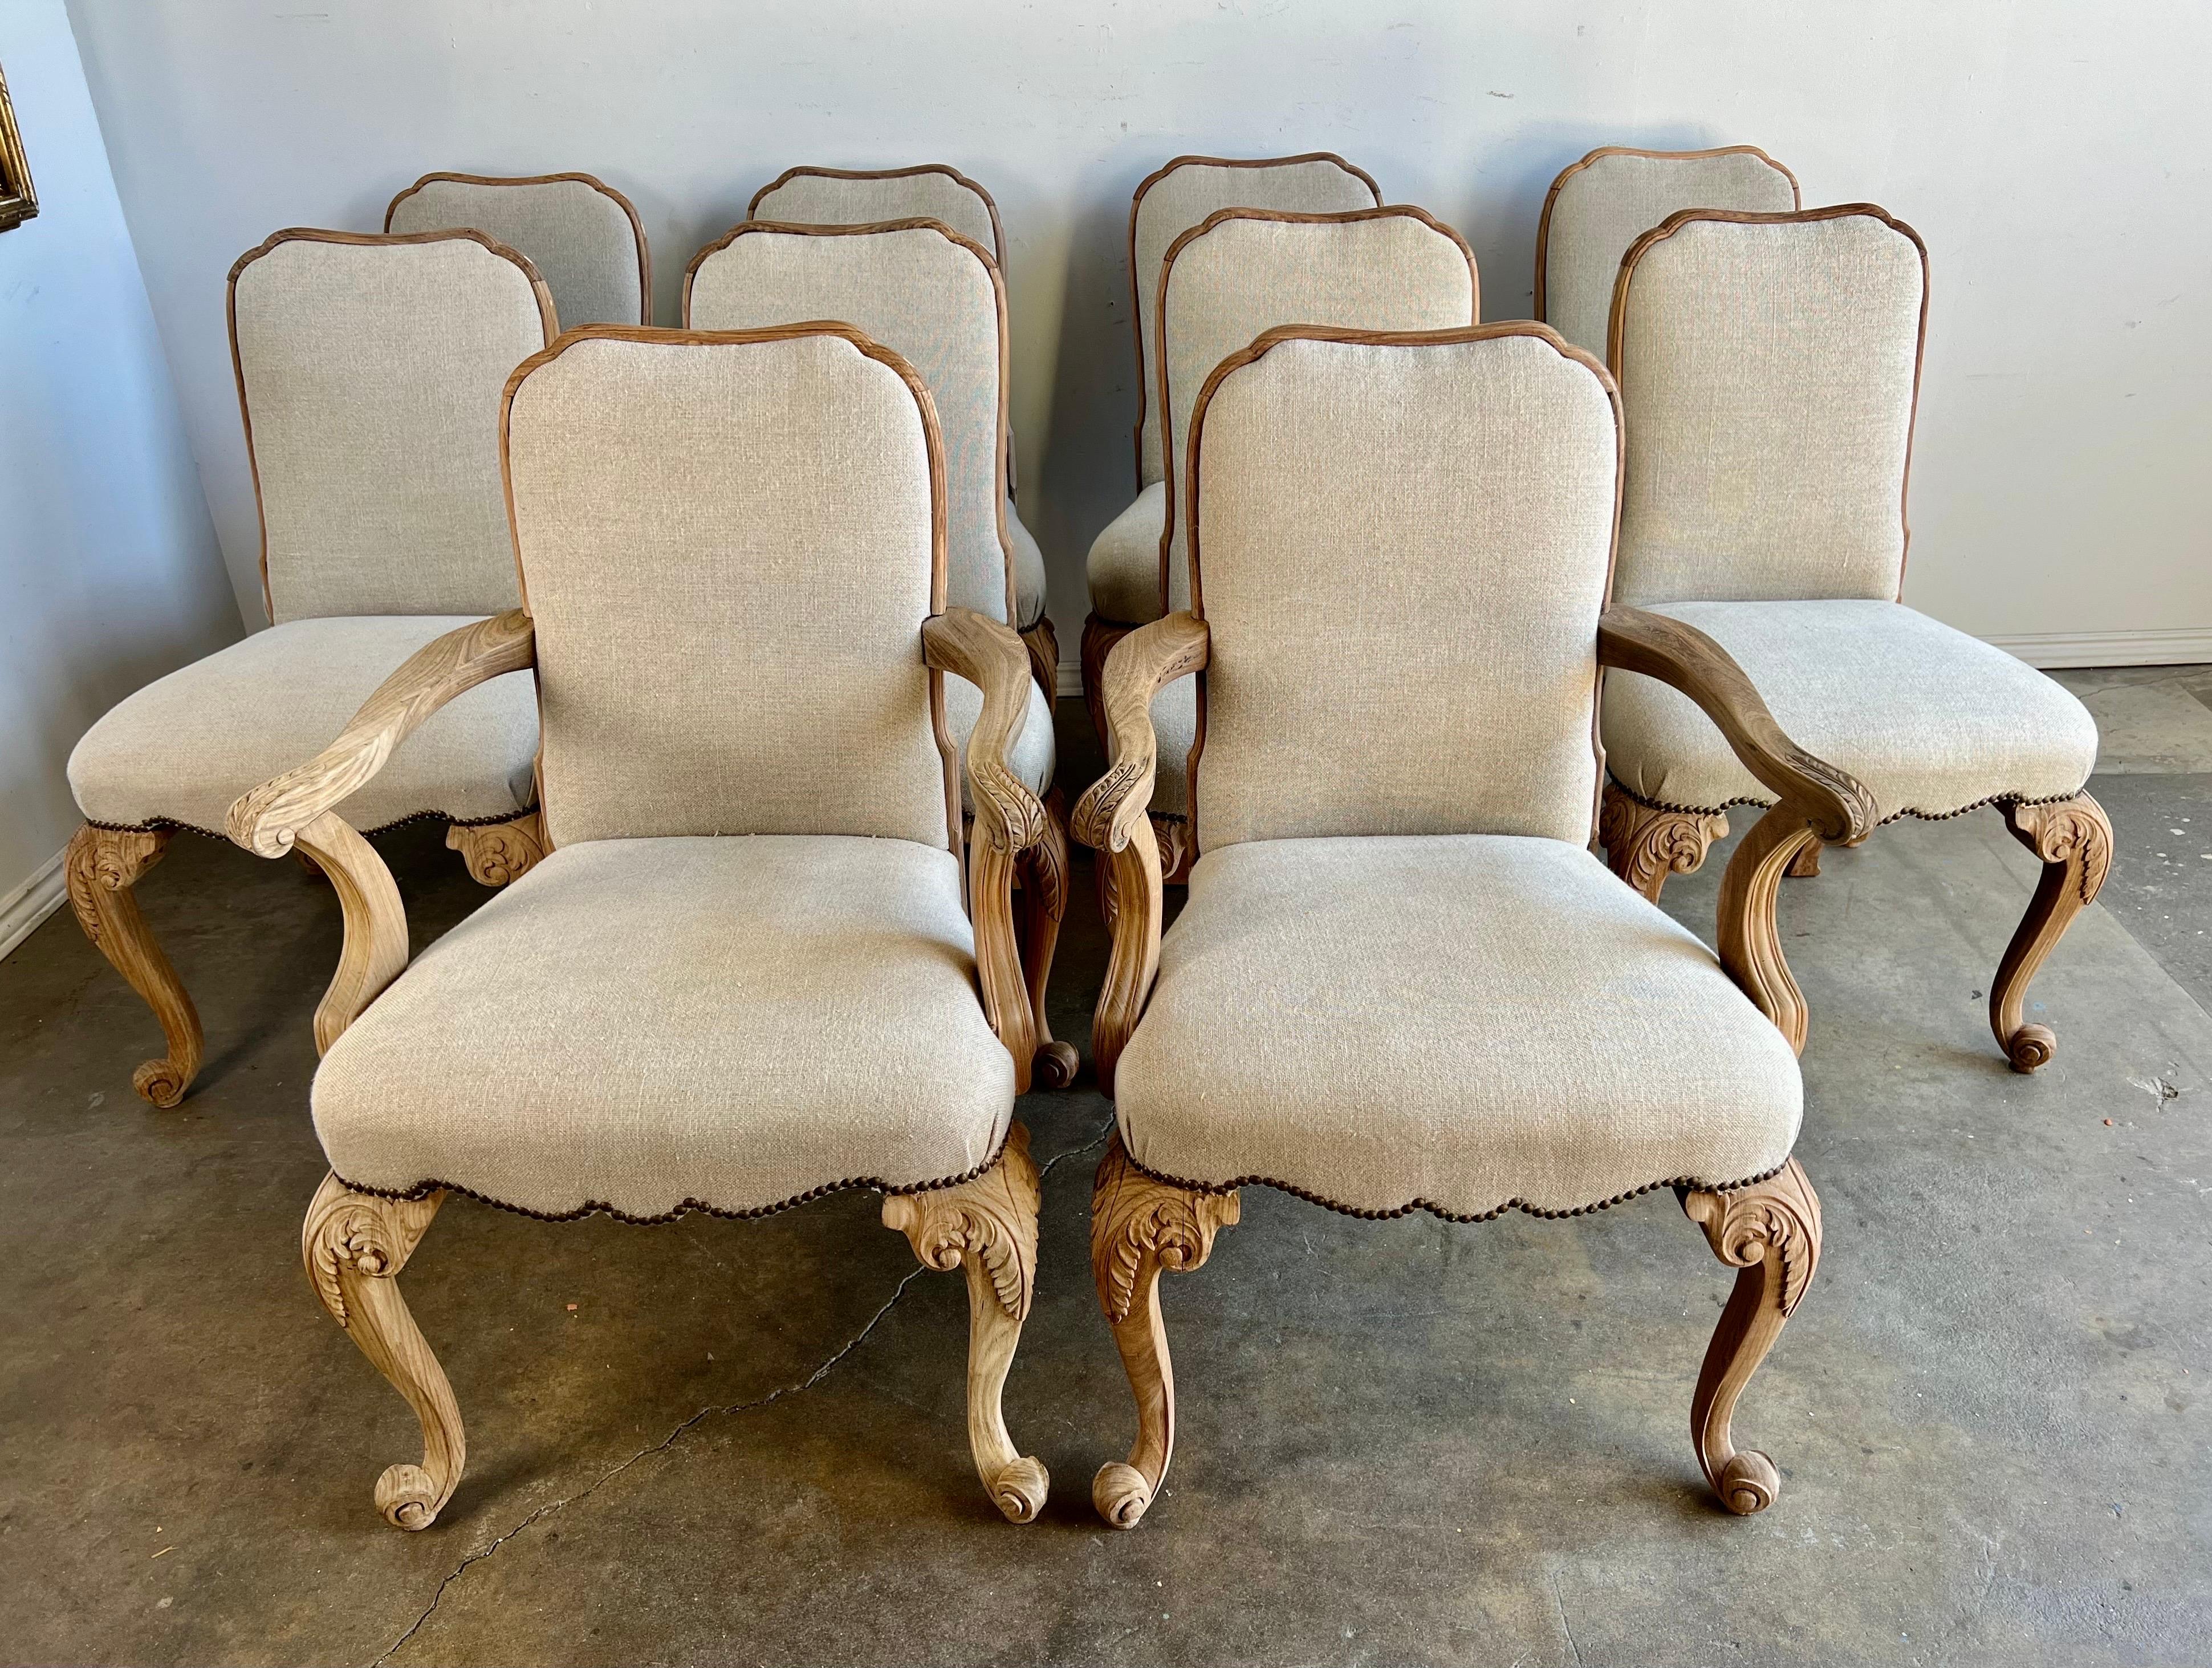 Set of 10 19th C. French carved dining chairs beautifully carved and newly upholstered in washed Belgium linen. The chairs stand on four cabriole legs that end in rams head feet. We have the matching dining table sold separately.